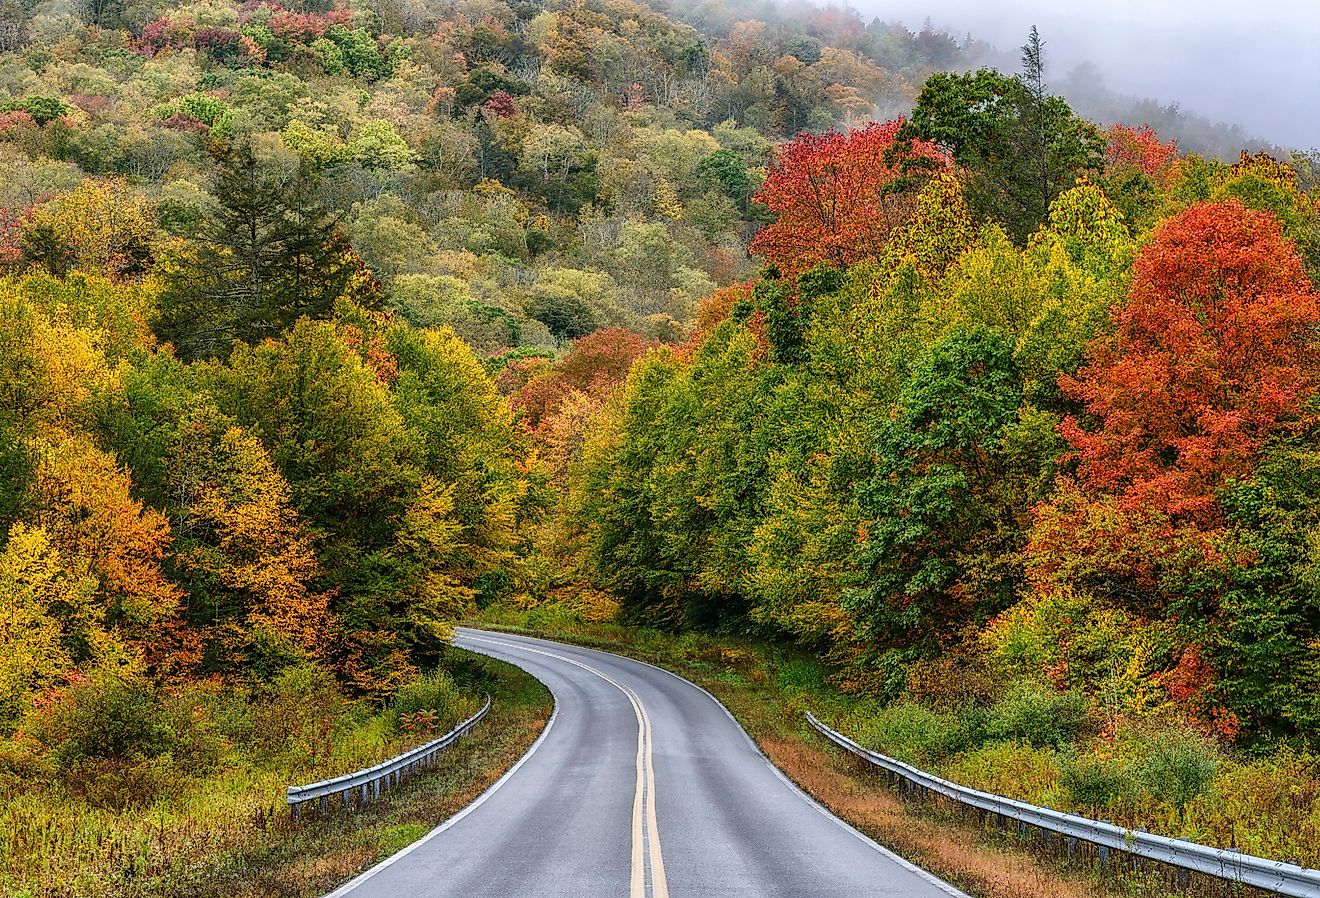 Autumn view along the Highland Scenic Highway, Route 150 a National Scenic Byway, Pocahontas County, West Virginia.